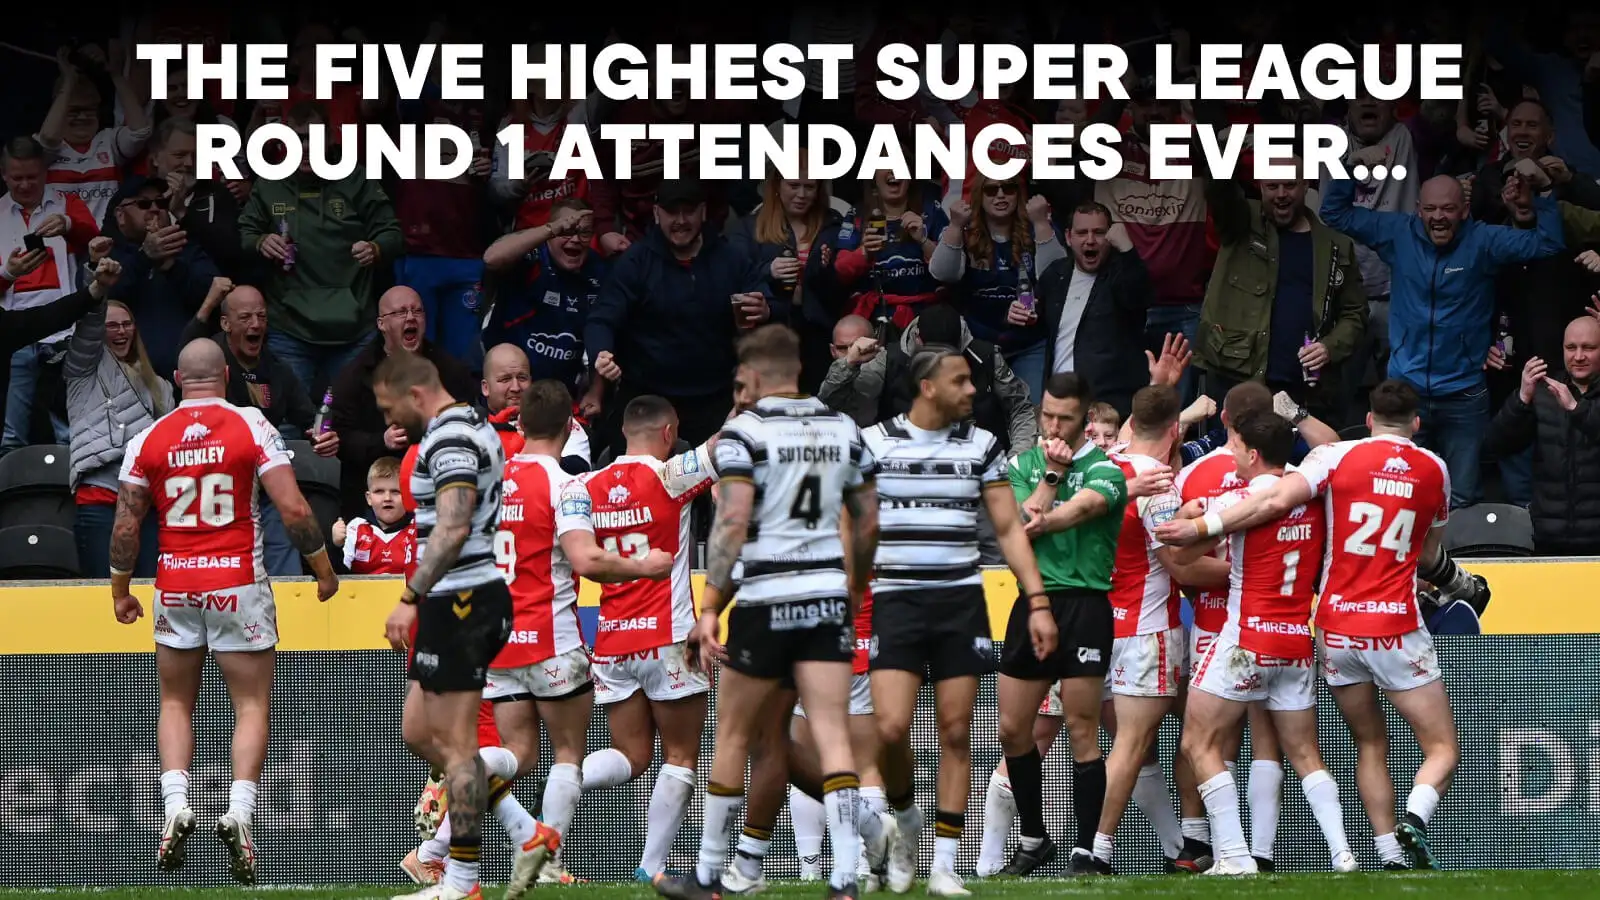 Hull derby, 'The five highest Super League Round 1 attendances ever'